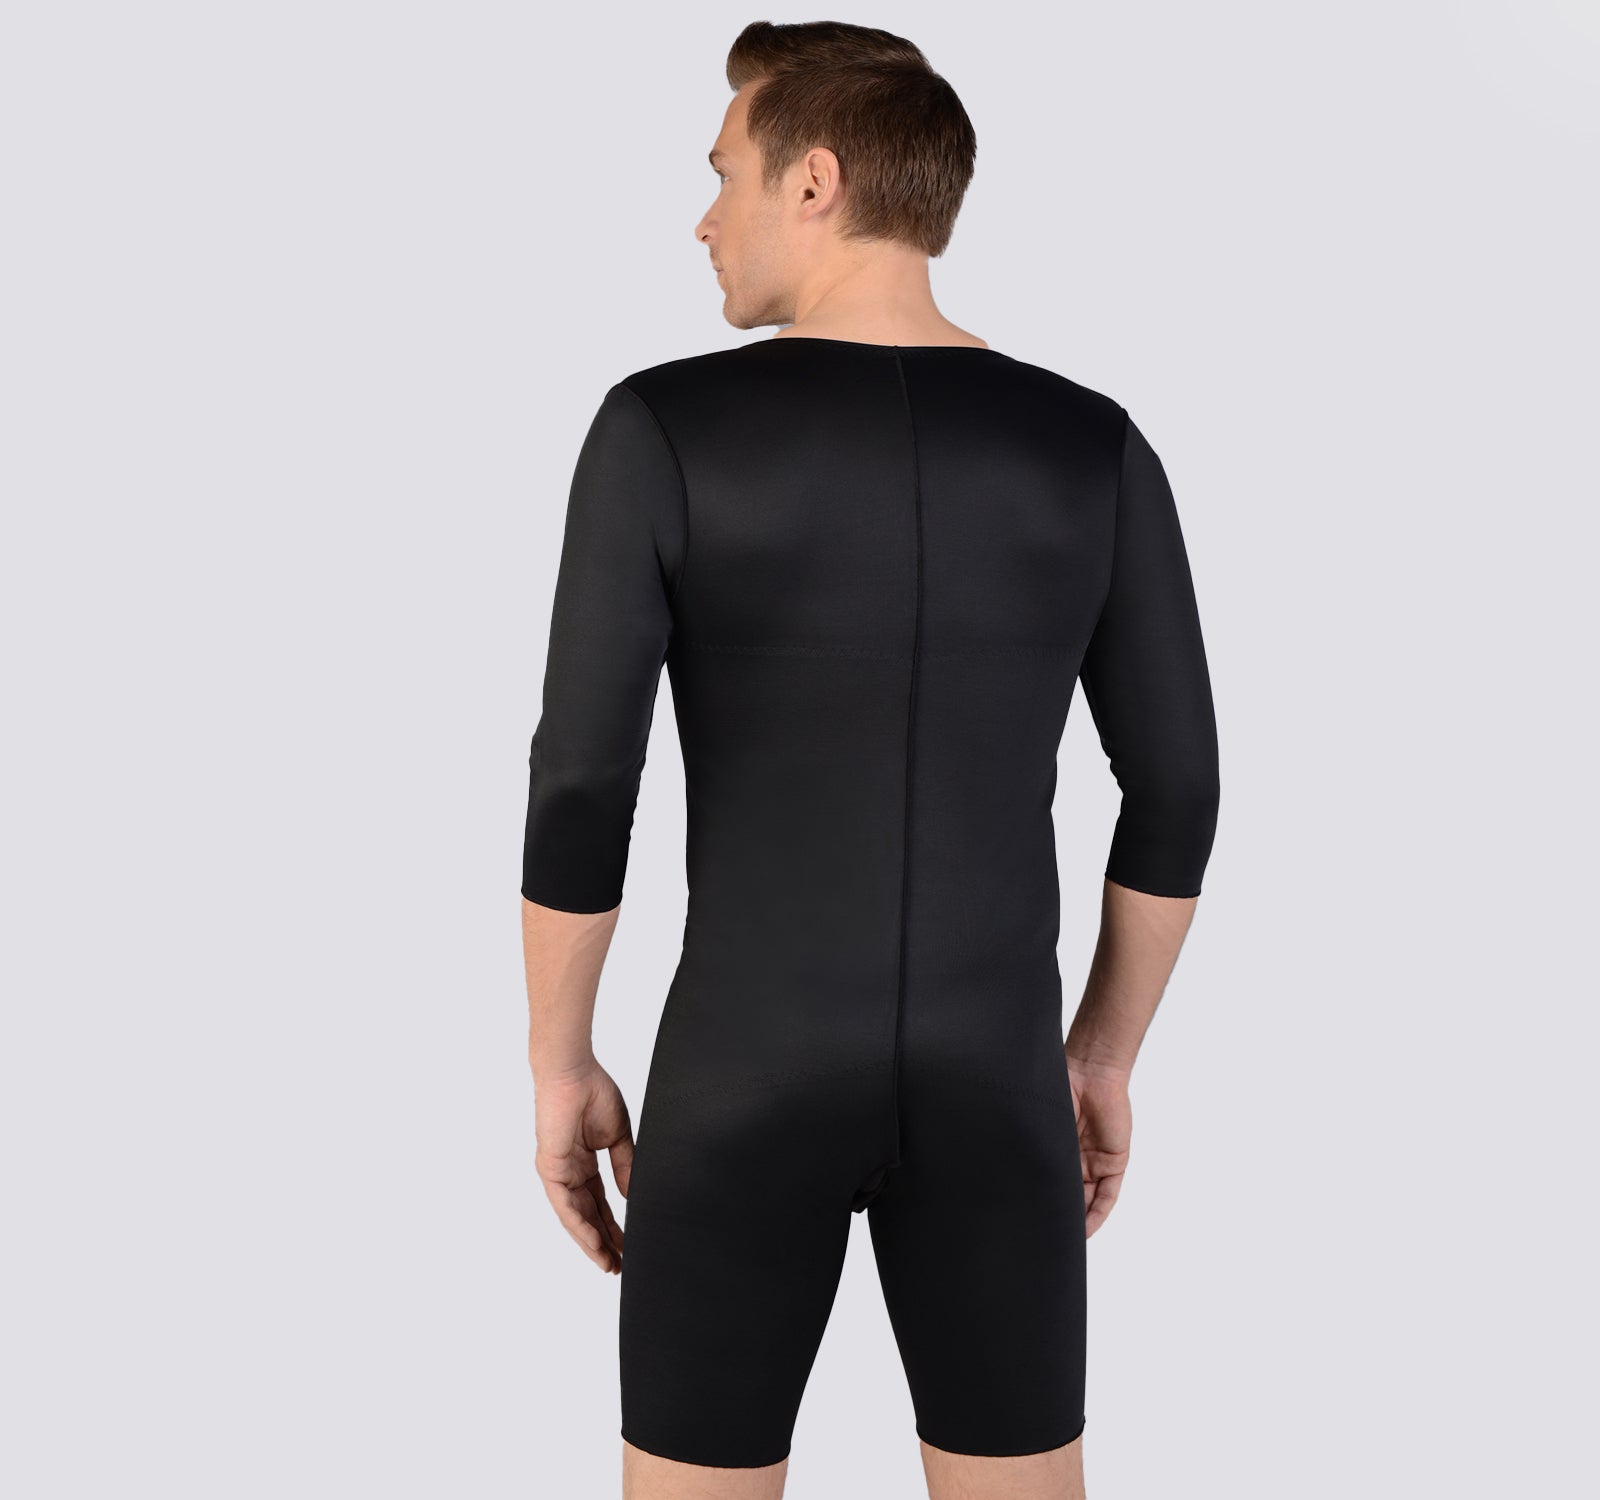 Stage 1 Compression Bundle: Option 2 (Full body above the knee